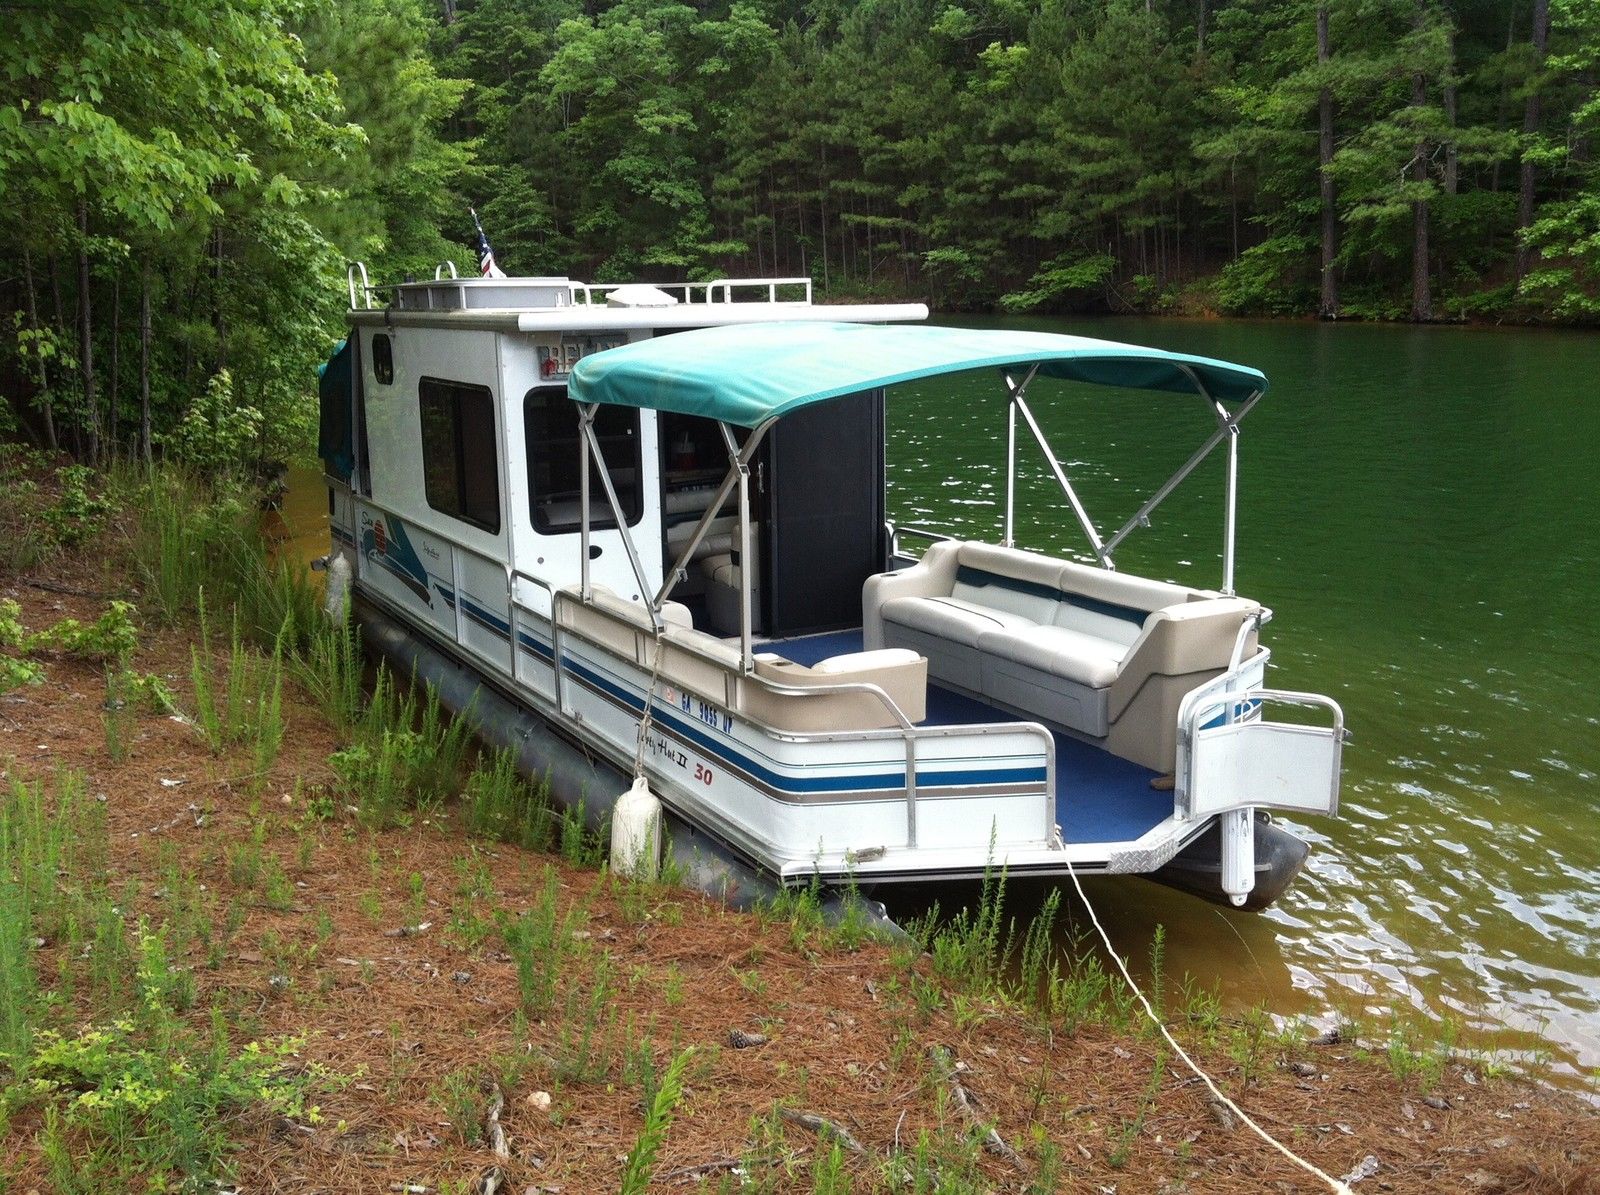 sun tracker party hut 1998 for sale for $21,500 - boats